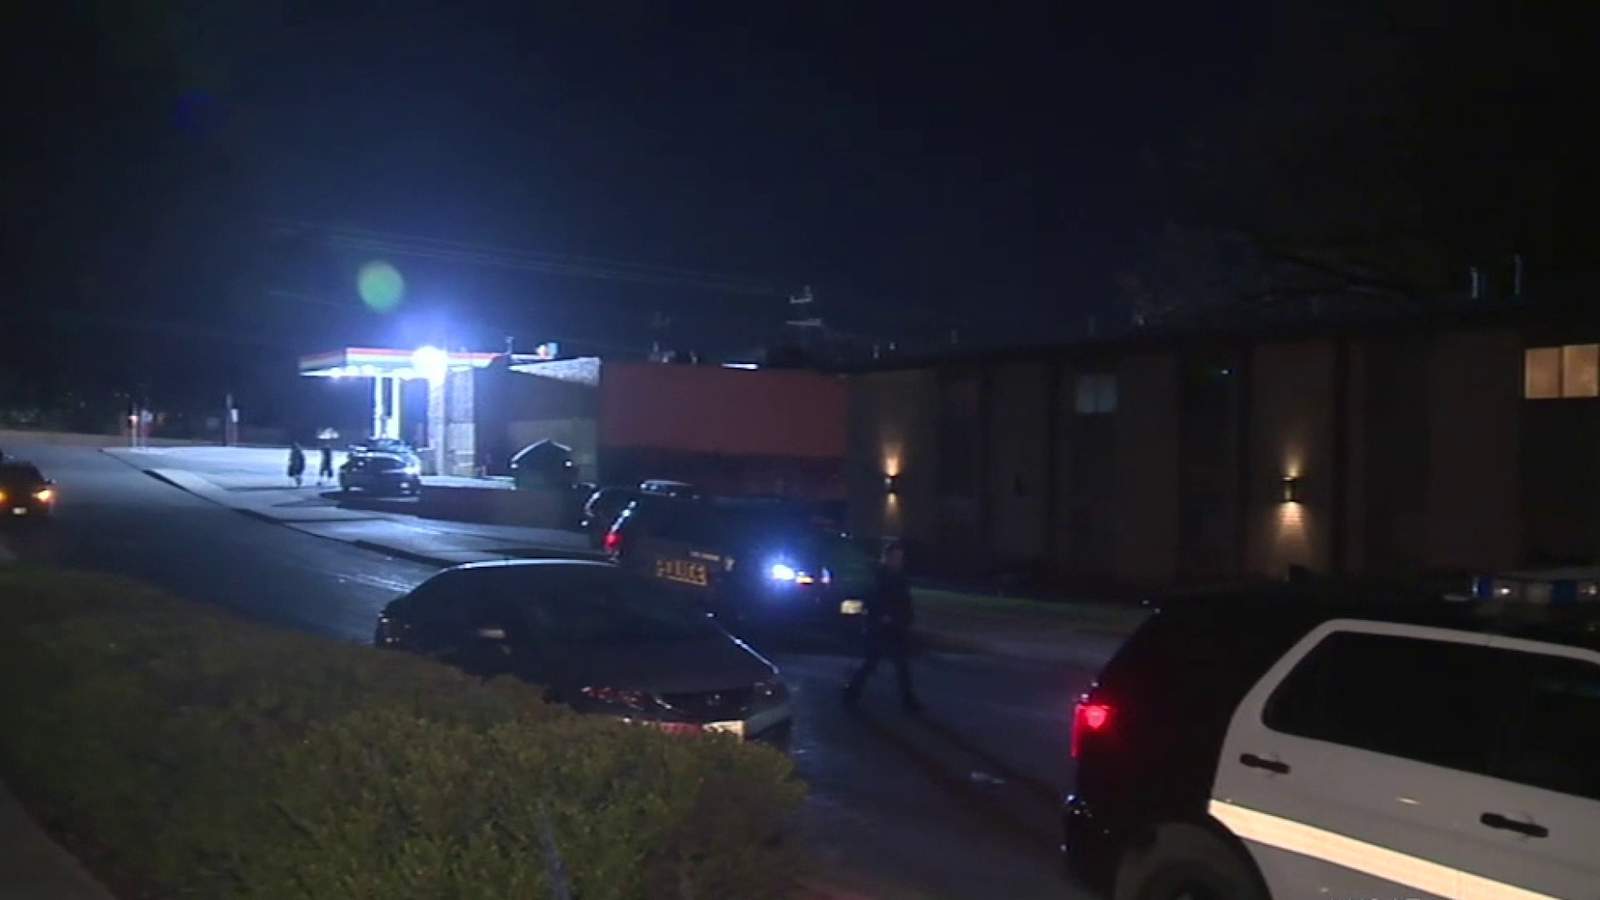 2 men hospitalized after shooting at apartment complex, police say